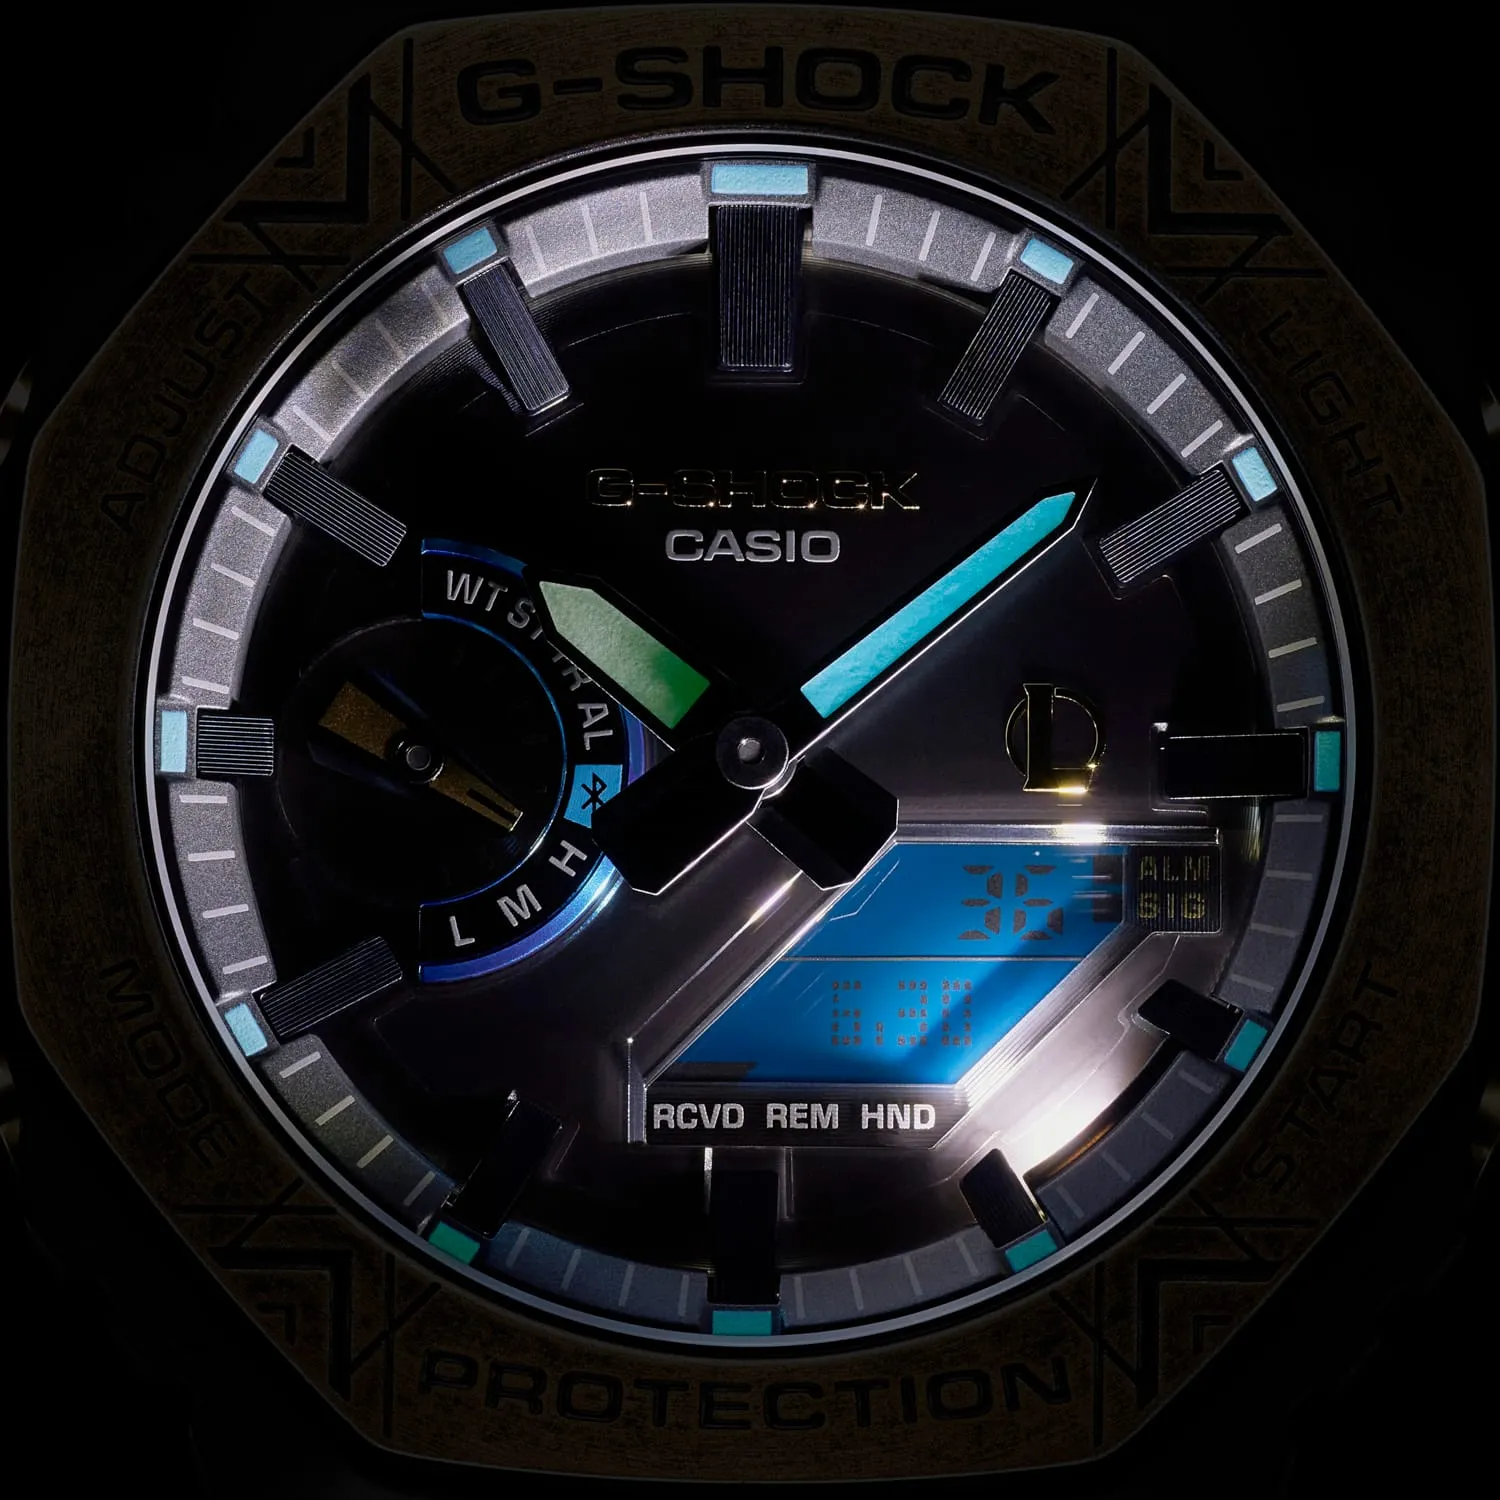 G-SHOCK's Legendary Leap into the World of League of Legends